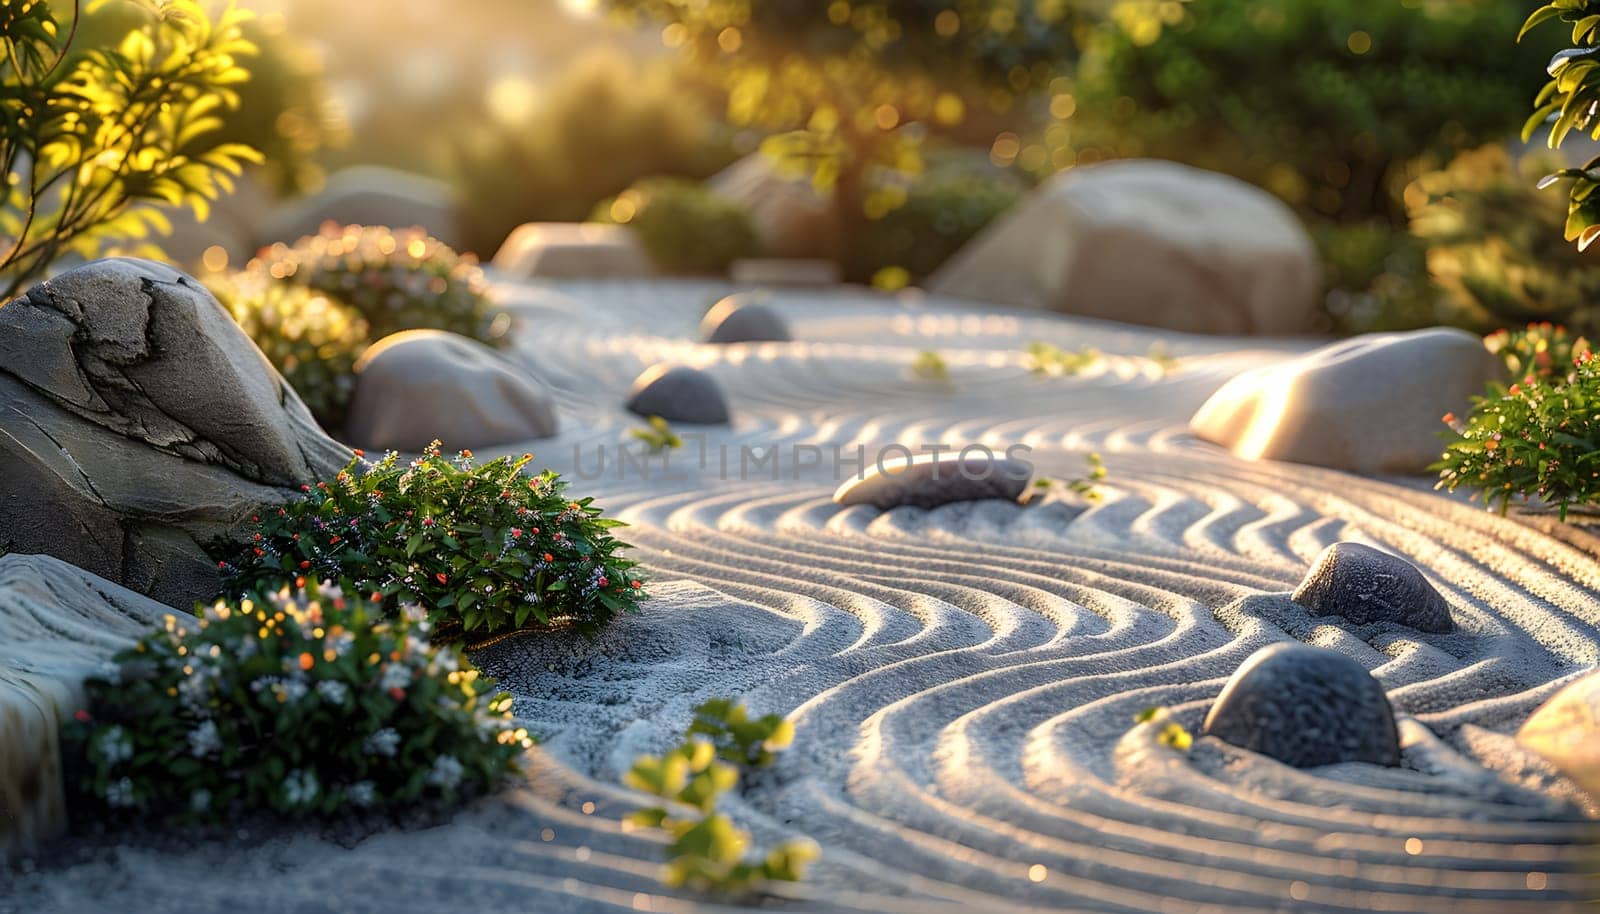 A natural landscape with rocks, plants, and watercourses in the sand. Terrestrial plants, grass, and groundcover adapted to the morning sunlight